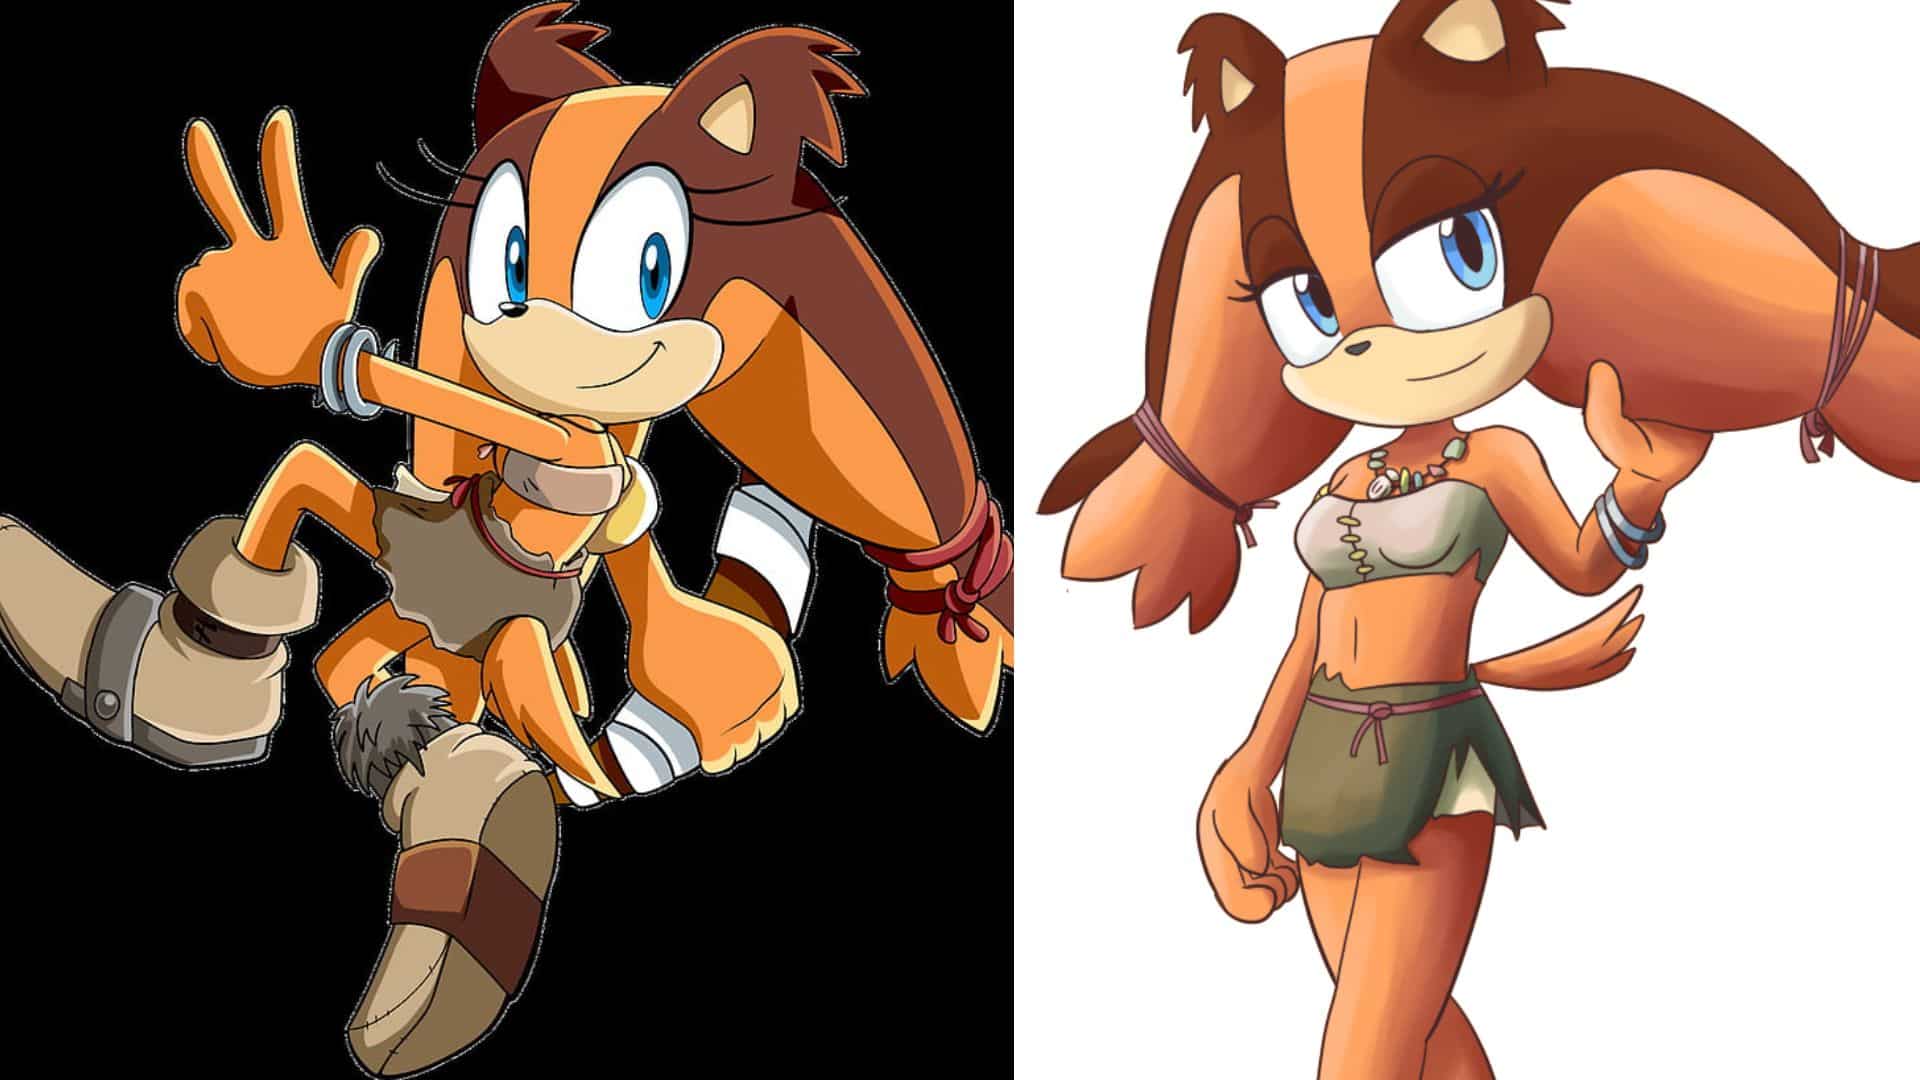 Sticks The Badger from Hottest Sonic Girls